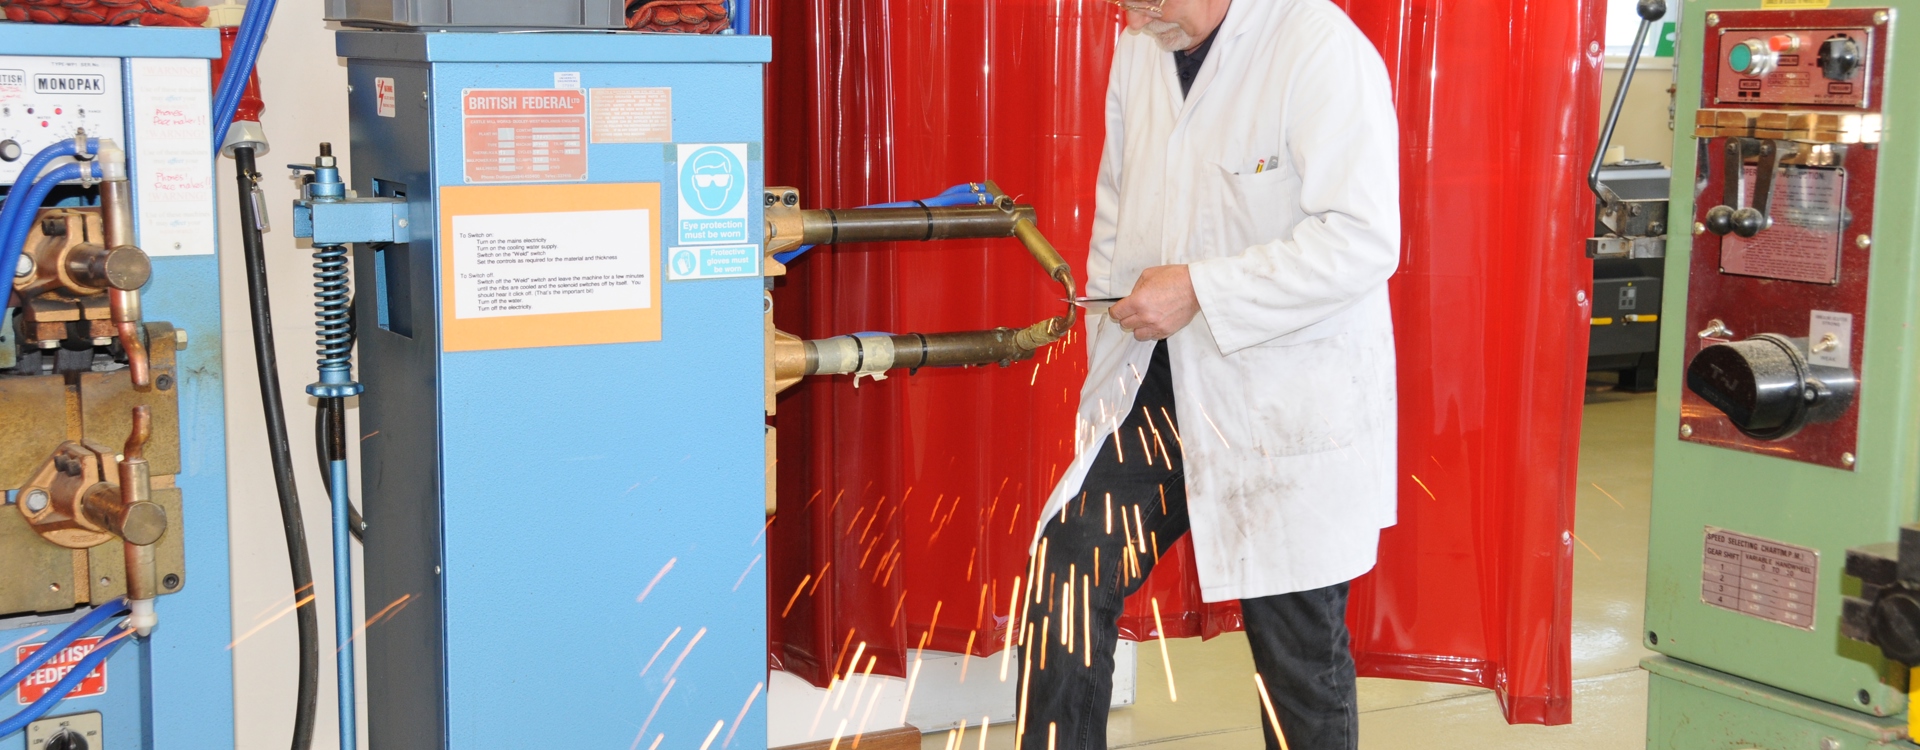 Maurice Keeble-Smith spot-welding in a 2nd year student lab in 2015